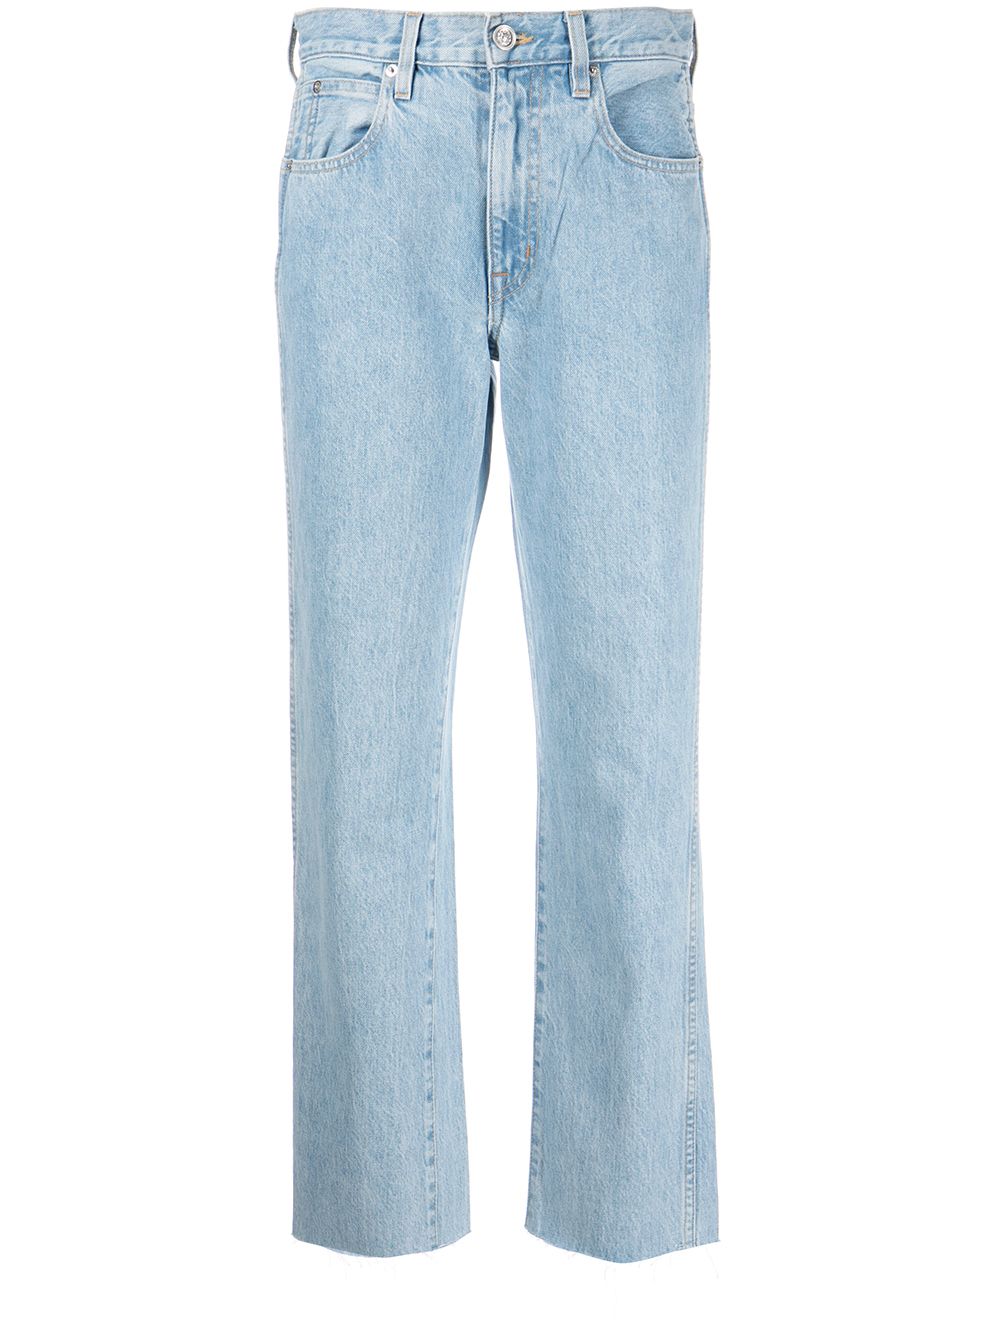 mid-rise washed jeans